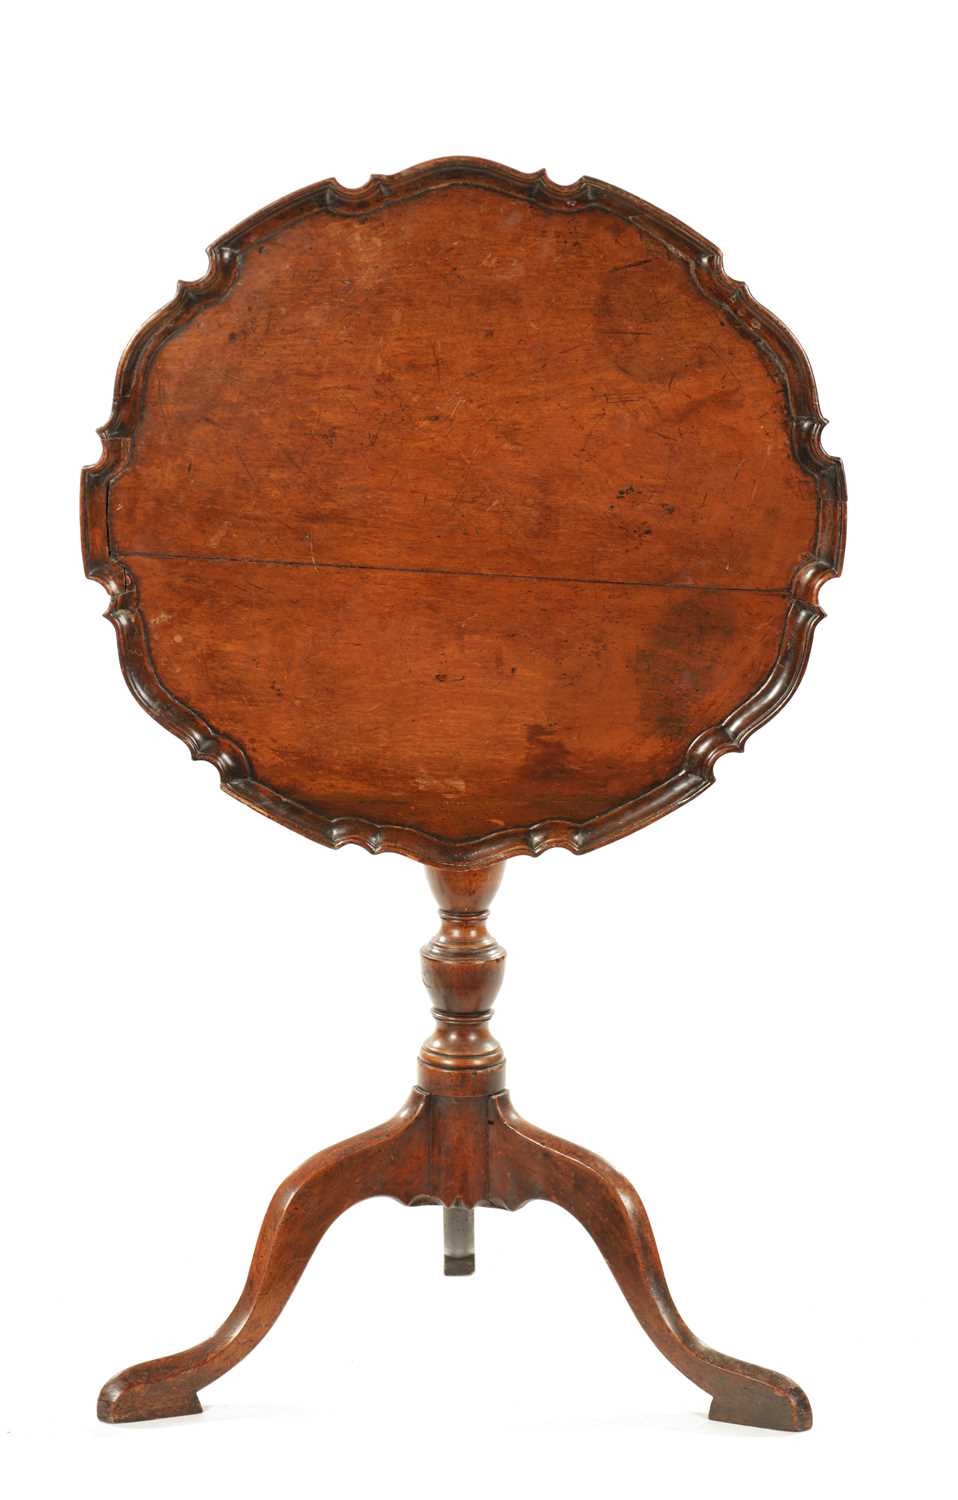 AN 18TH CENTURY COUNTRY MADE MAHOGANY TILT TOP TRIPOD TABLE